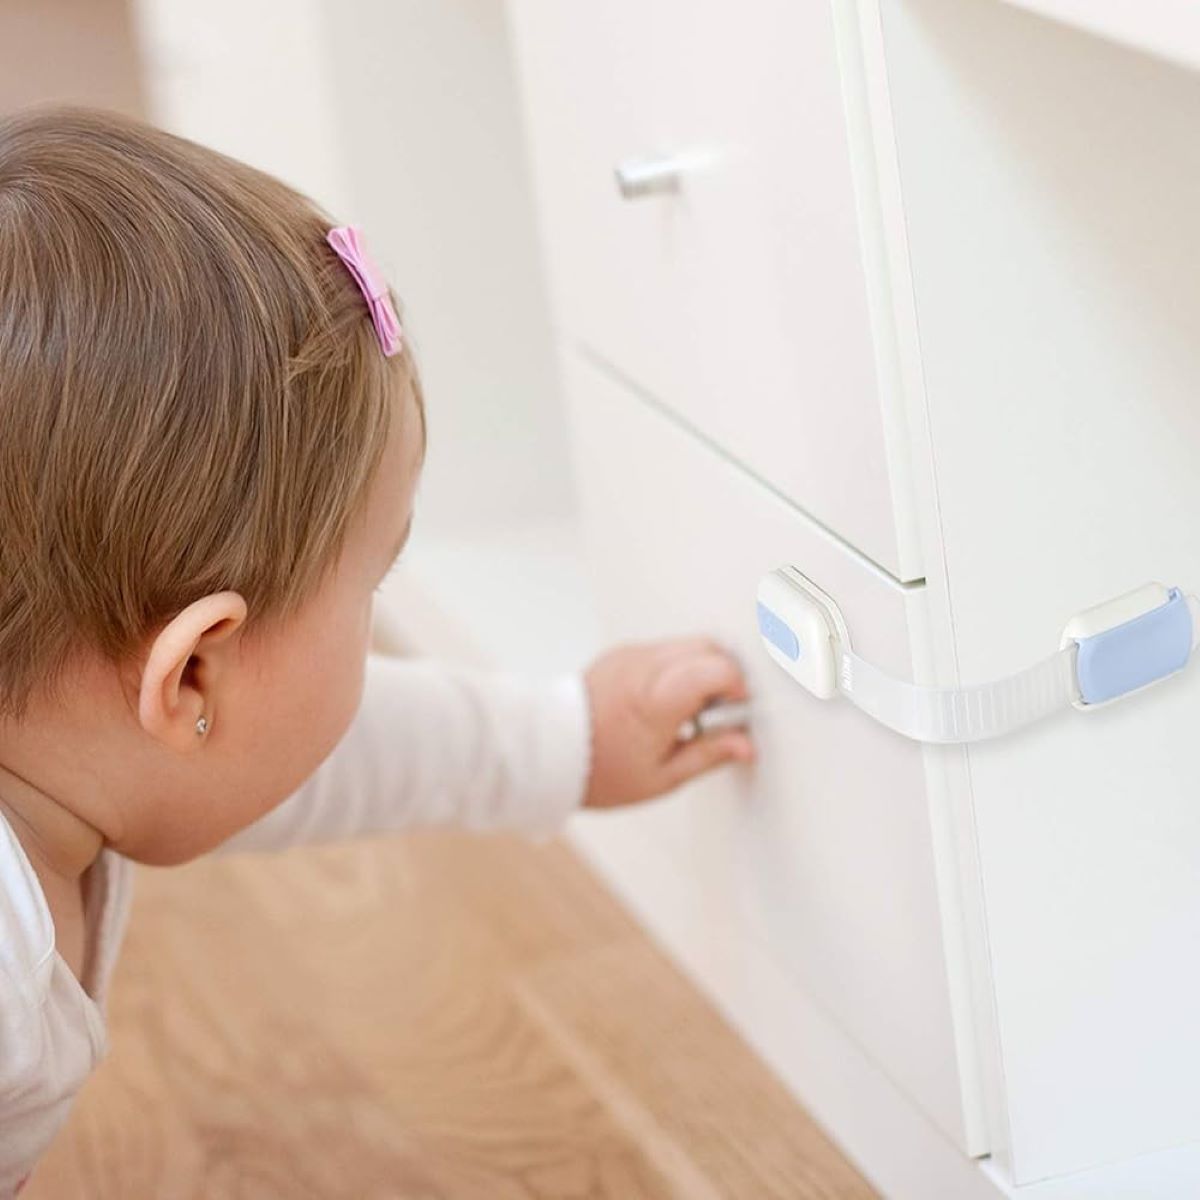 How To Childproof Cabinets Without Handles